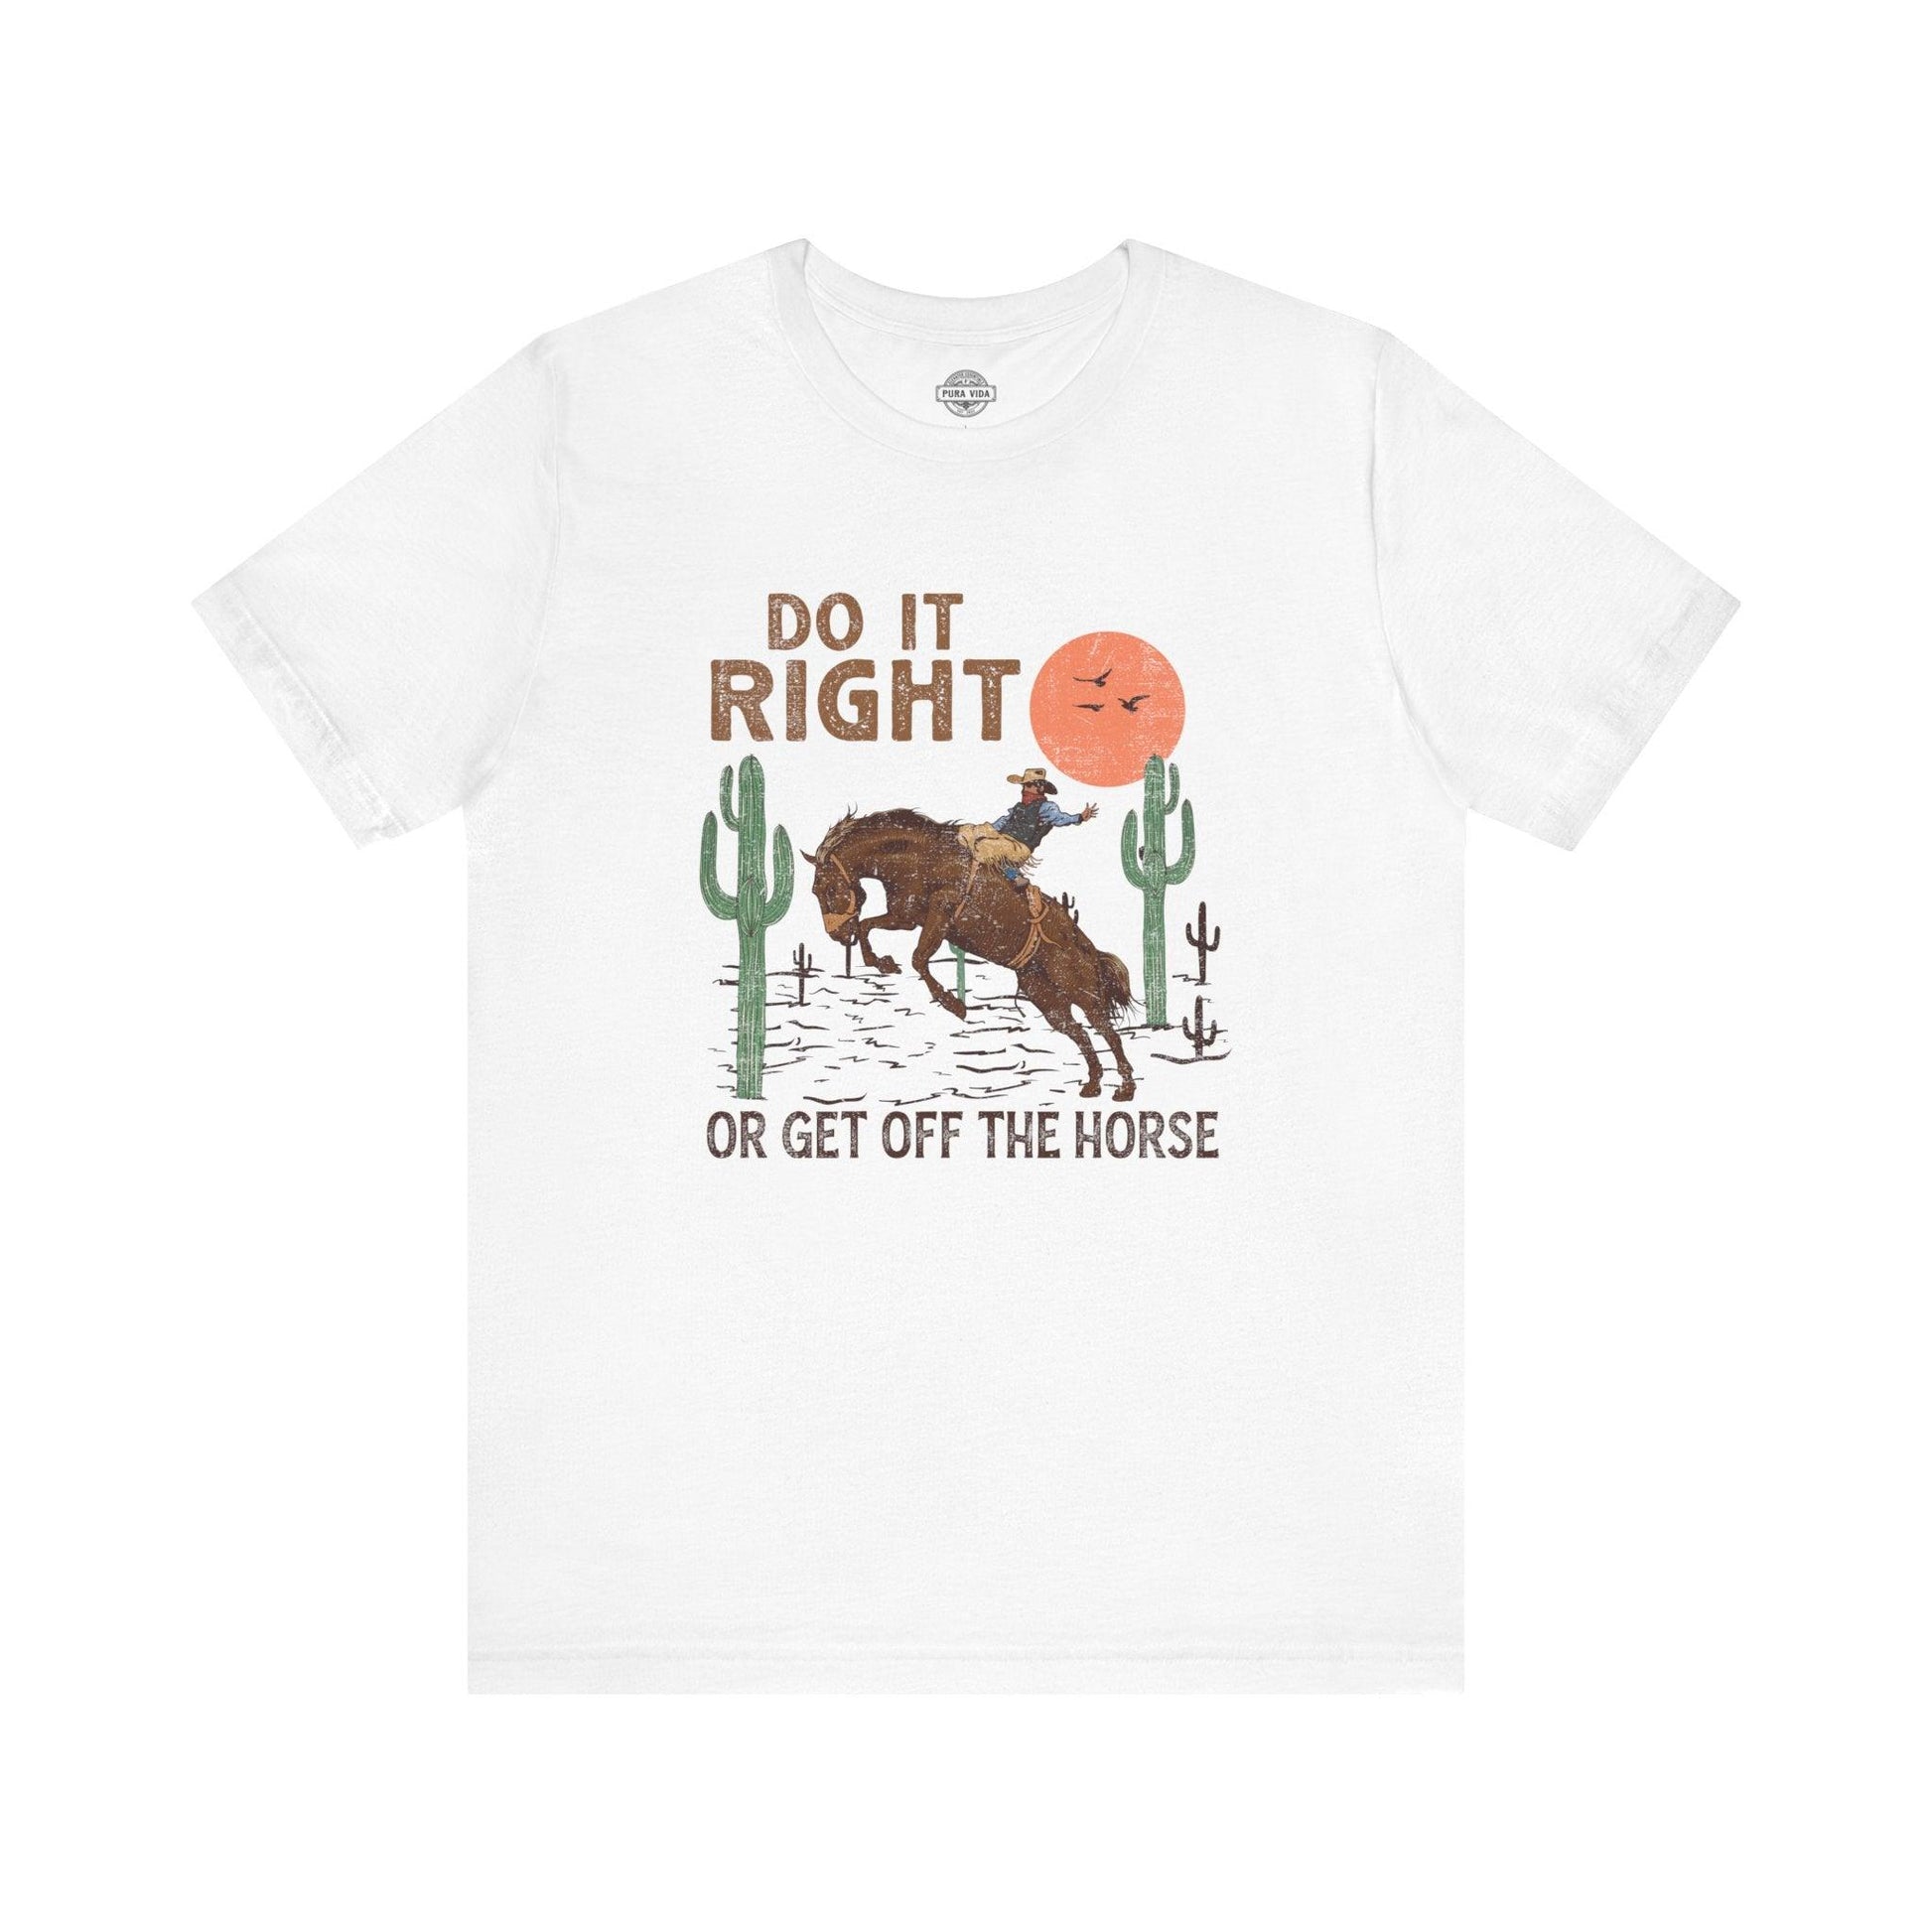 Do It Right or Get off the Horse - T-Shirt - The Pura Vida Co.